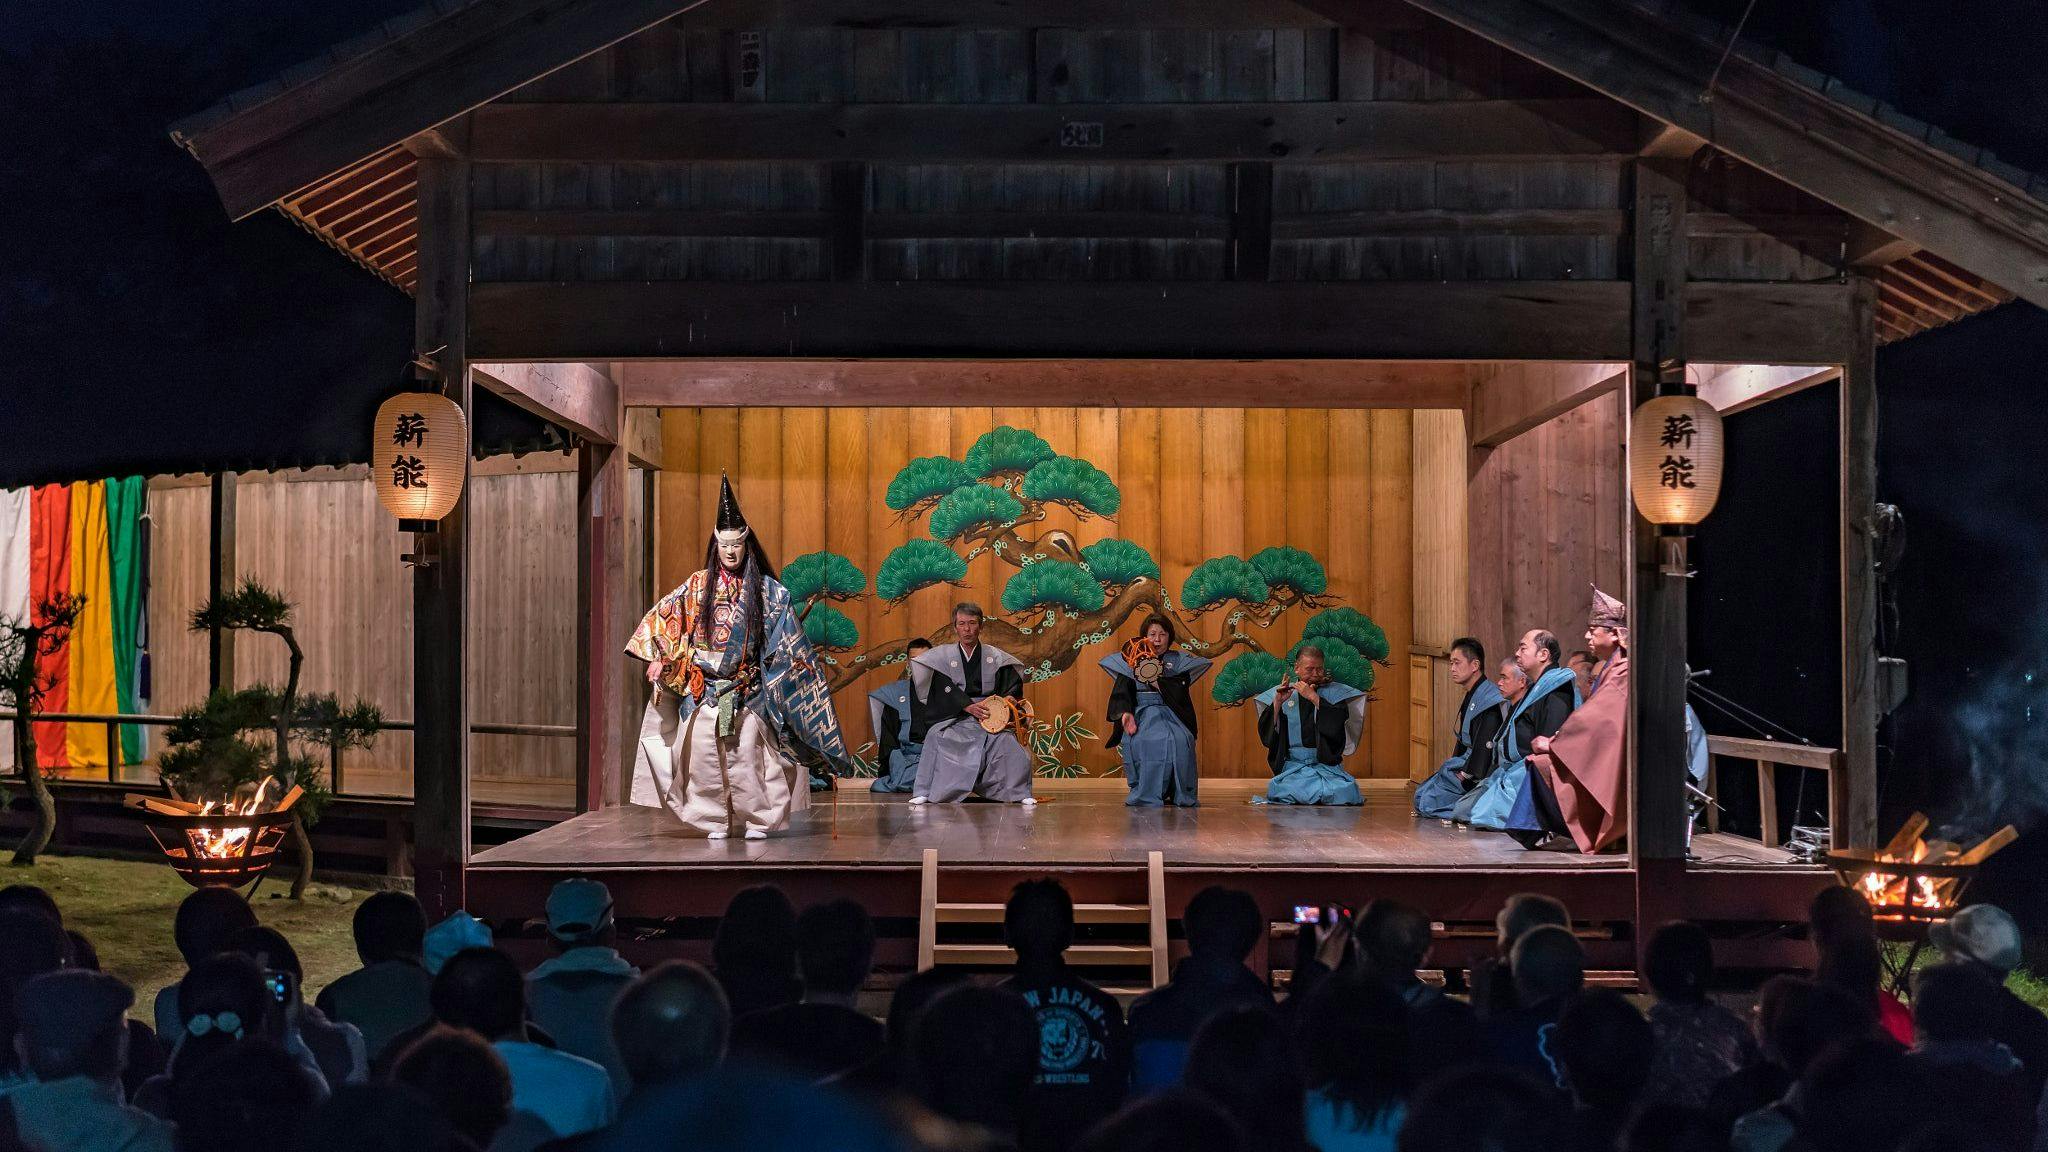 A 'Noh' performance on a stage in Sado, Japan.